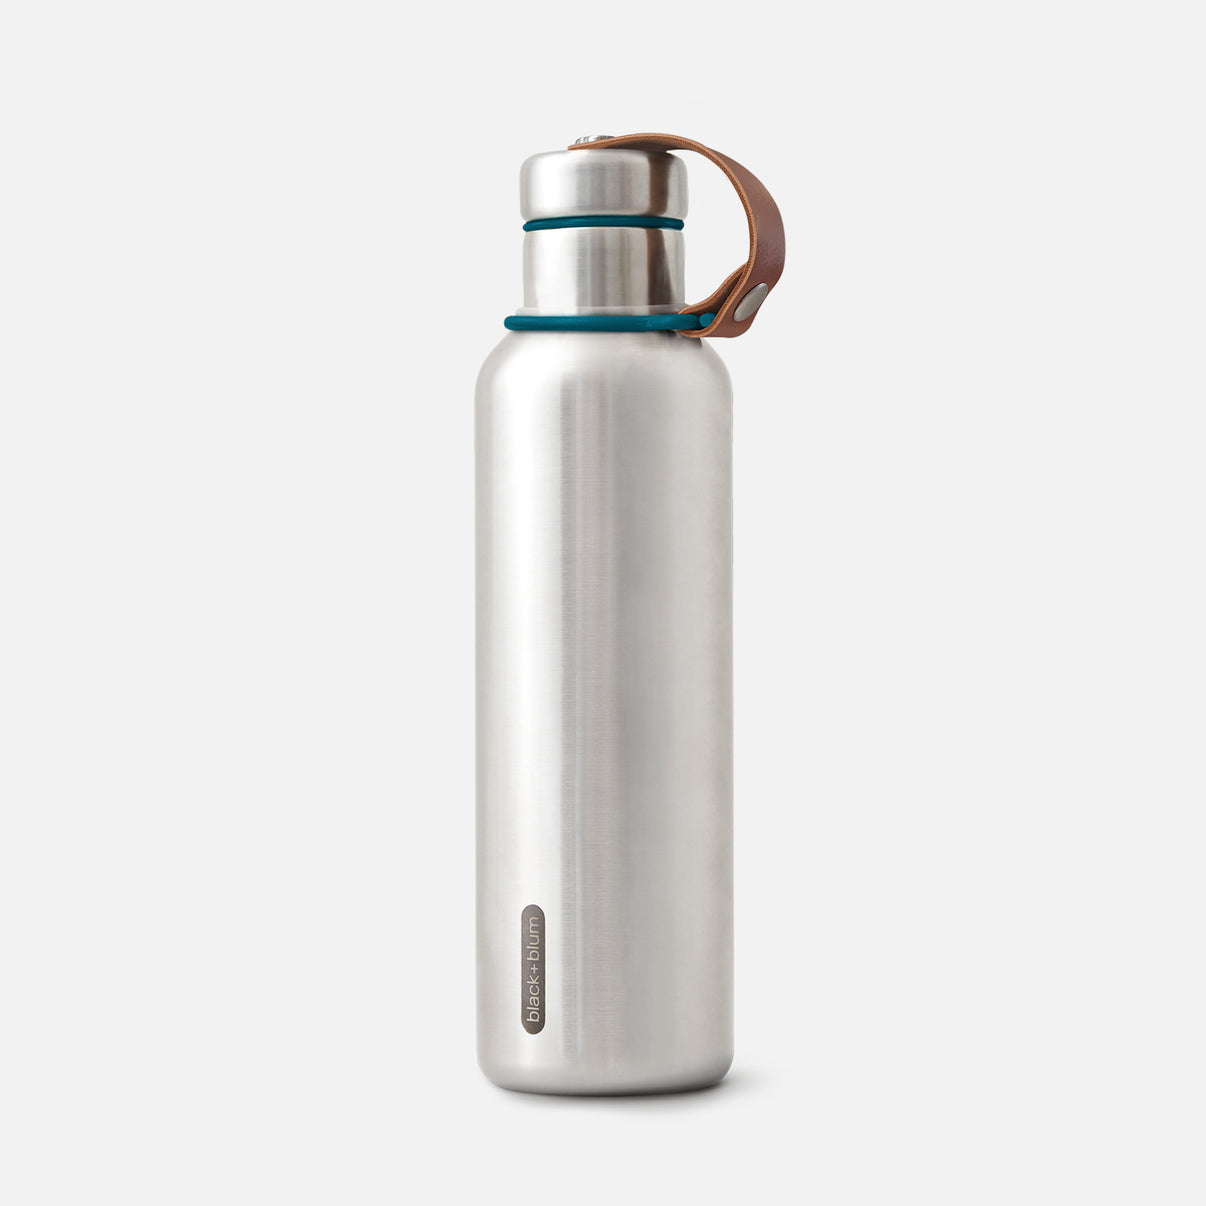 Simple Modern Filtered Water Bottle | Insulated Stainless-Steel Carbon  Filter Travel Water Bottles | Reusable for Clean Drinking Water On The Go 